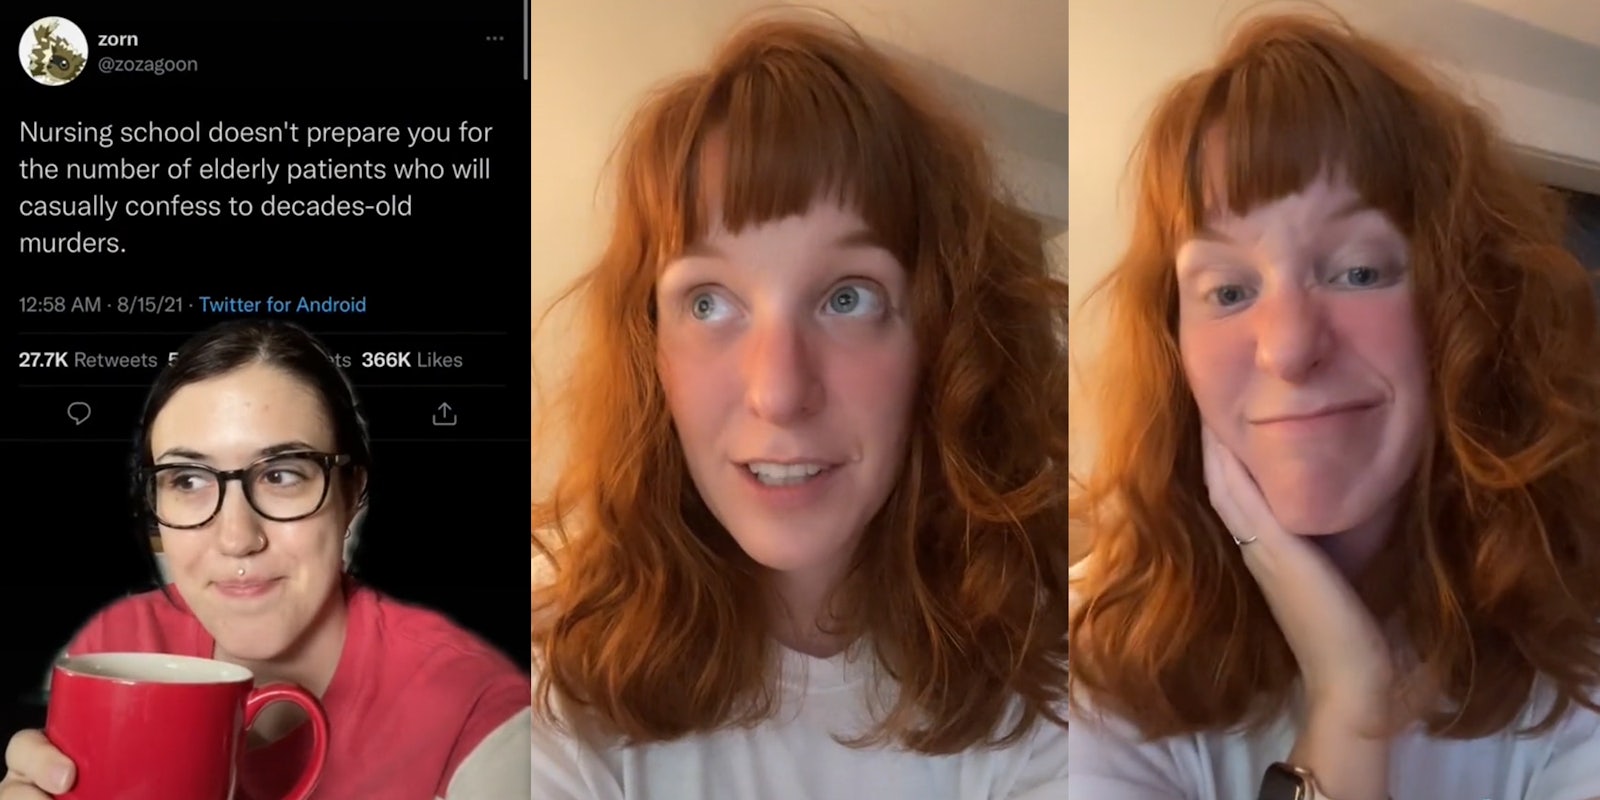 young woman with cup of coffee and tweet 'Nursing school doesn't prepare you for the number of elderly patients who will casually confess to decades-old murders.' (l) young woman looking off camera (c) young woman grimacing (r)